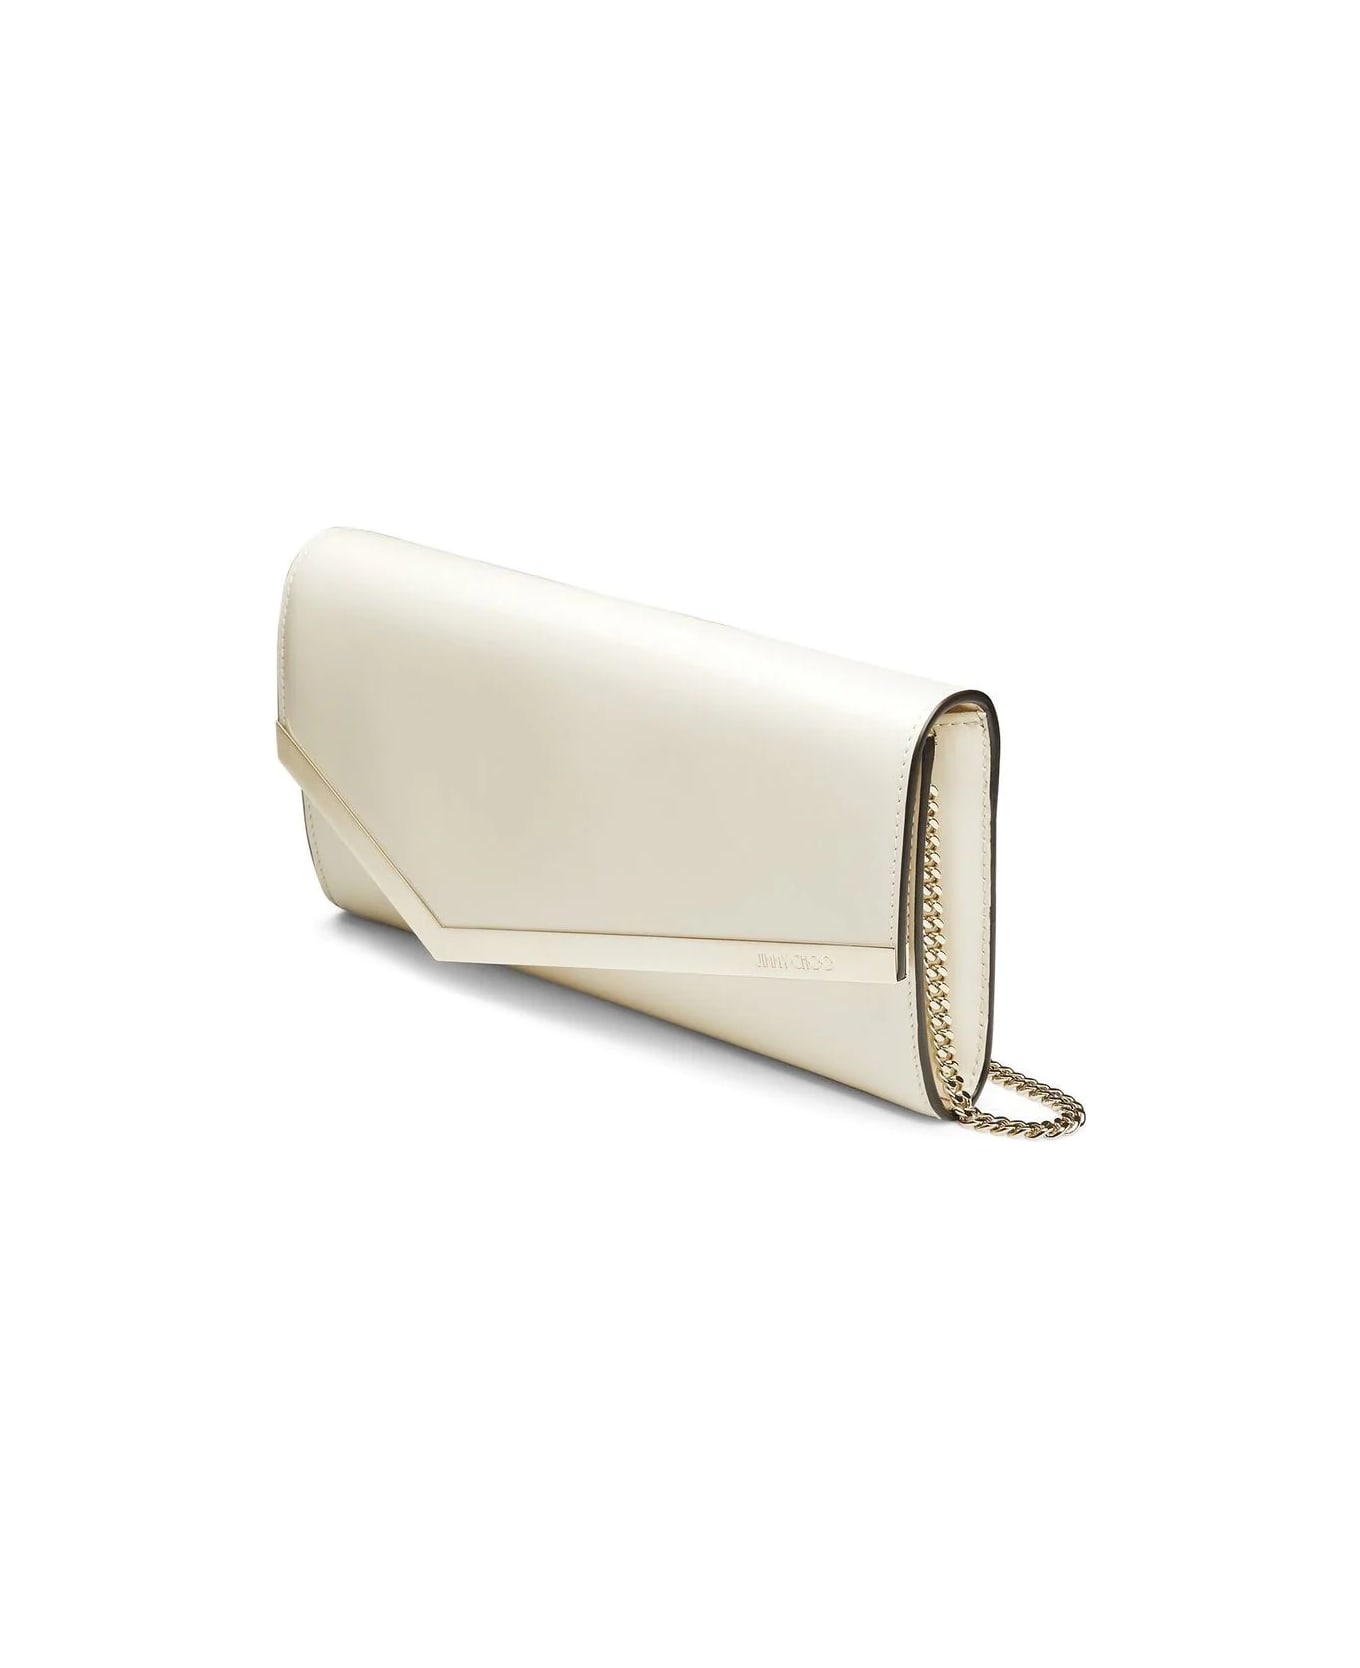 Jimmy Choo Emmie Clutch Bag In Milk Patent Leather - White クラッチバッグ